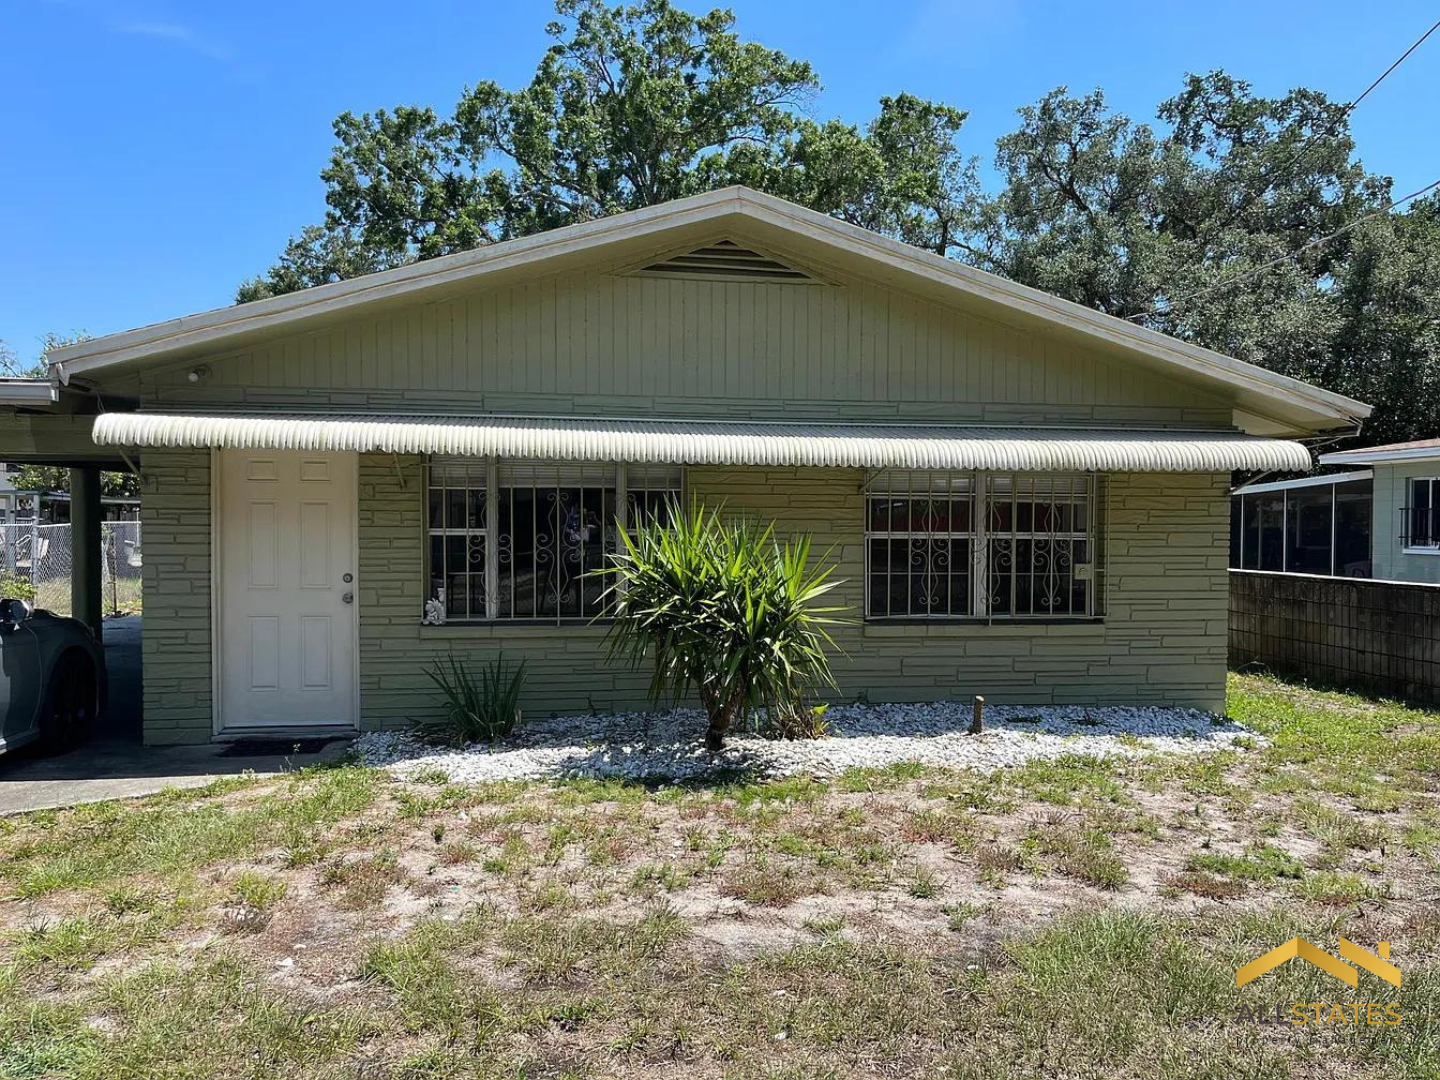 Photo of property: 1913 E Chelsea St, Tampa, FL 33610